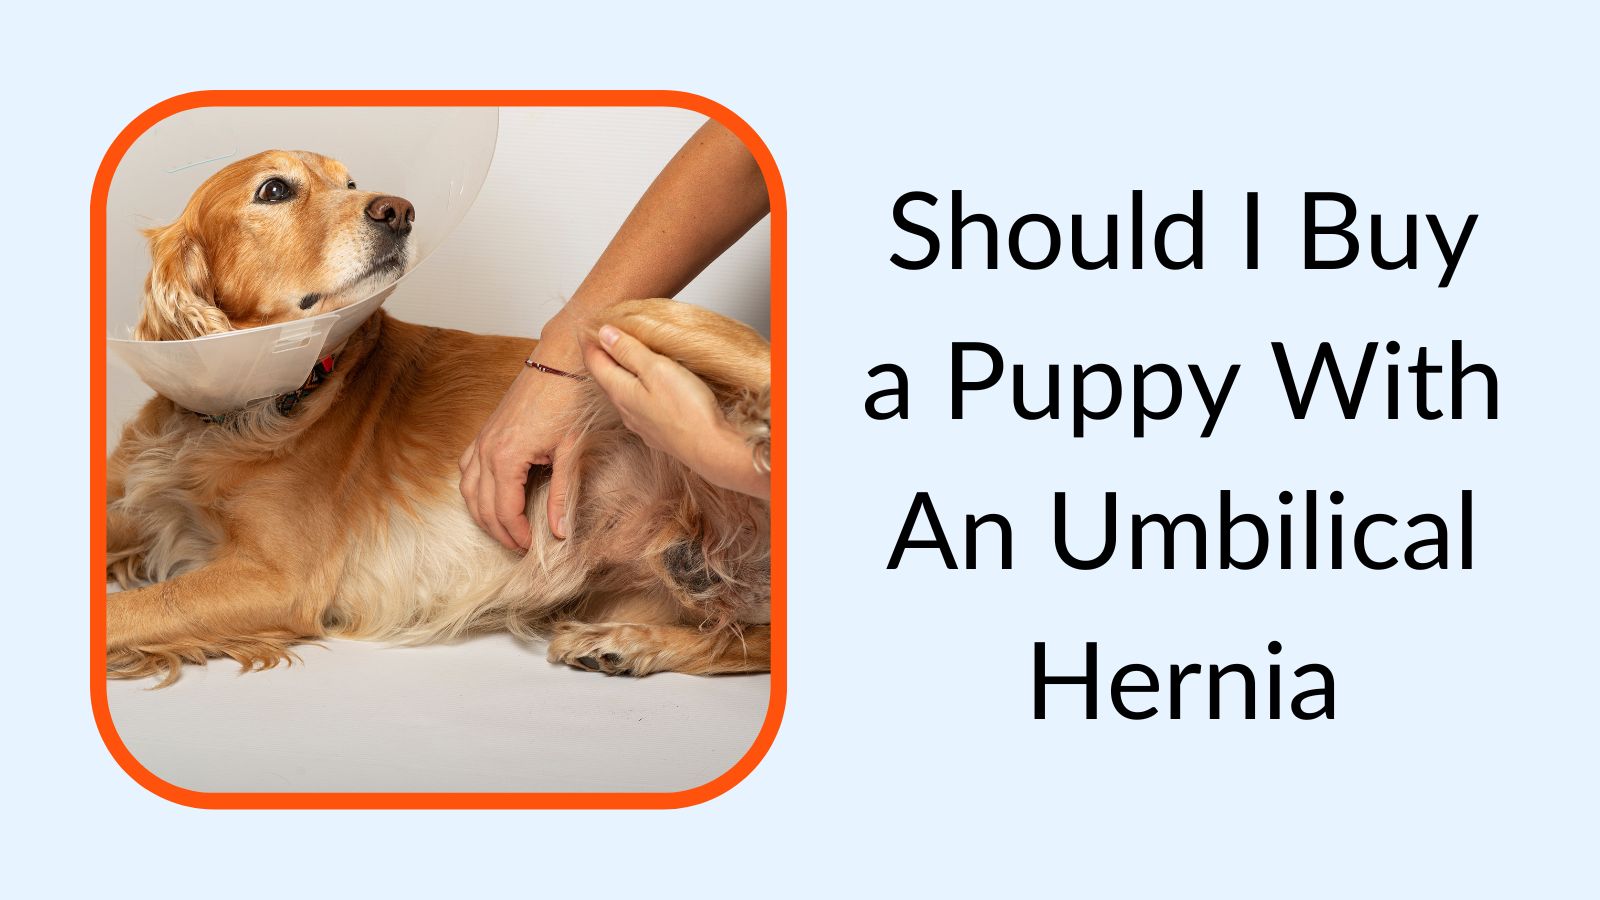 Should I Buy a Puppy With An Umbilical Hernia